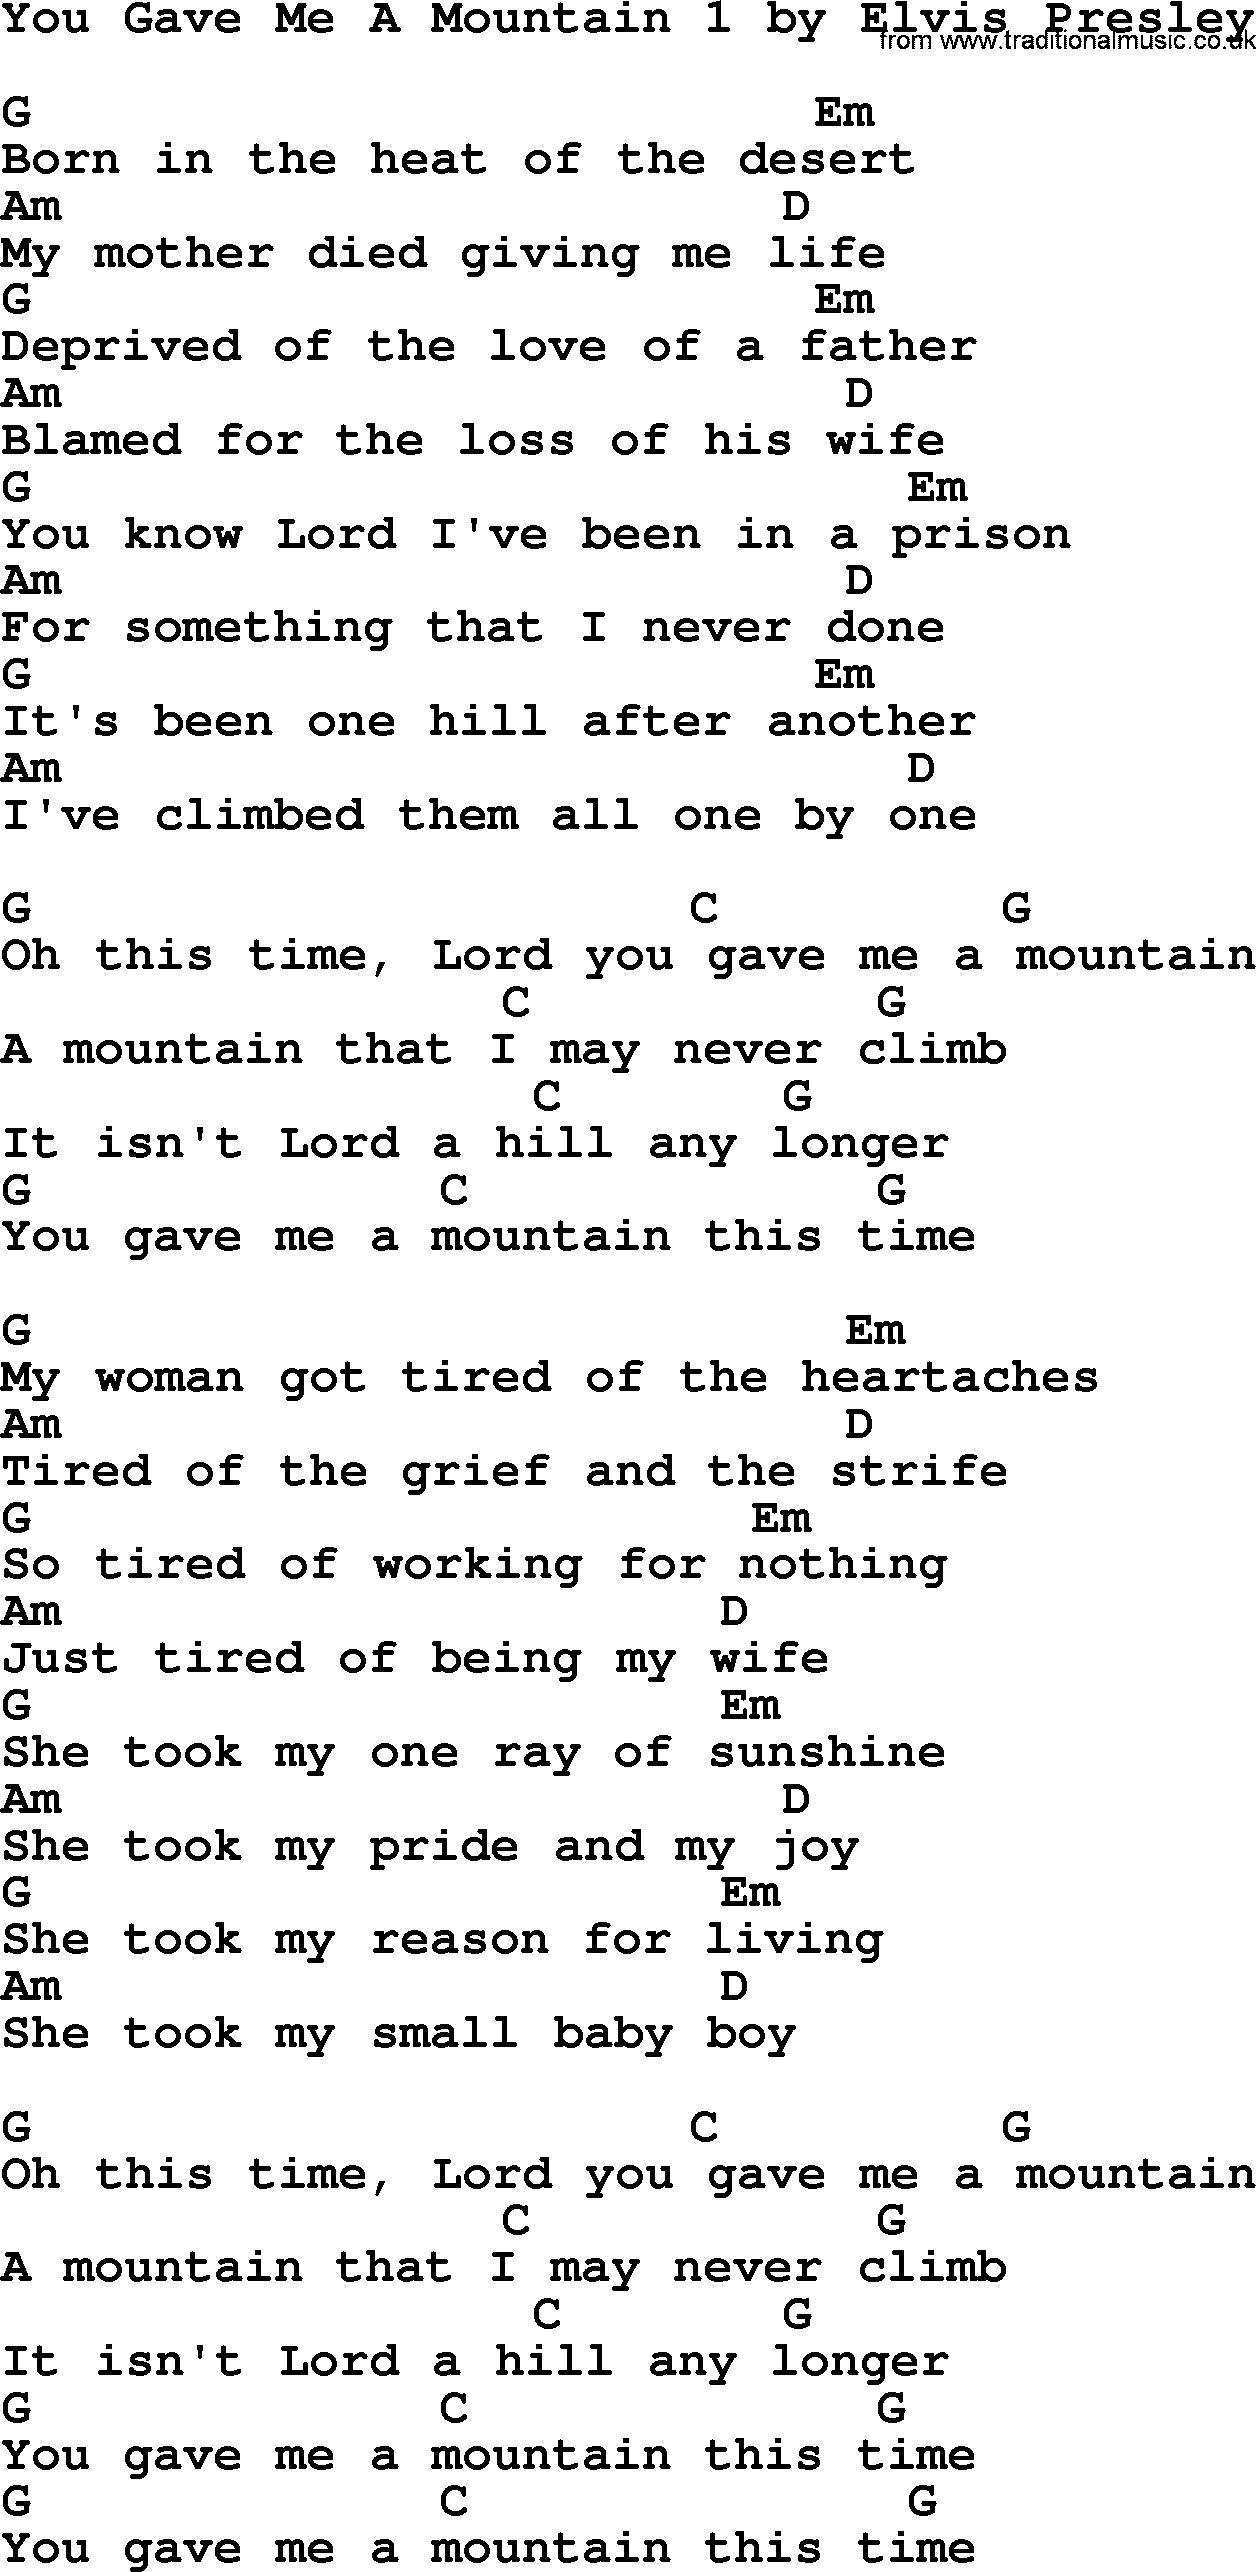 Elvis Presley song: You Gave Me A Mountain 1, lyrics and chords